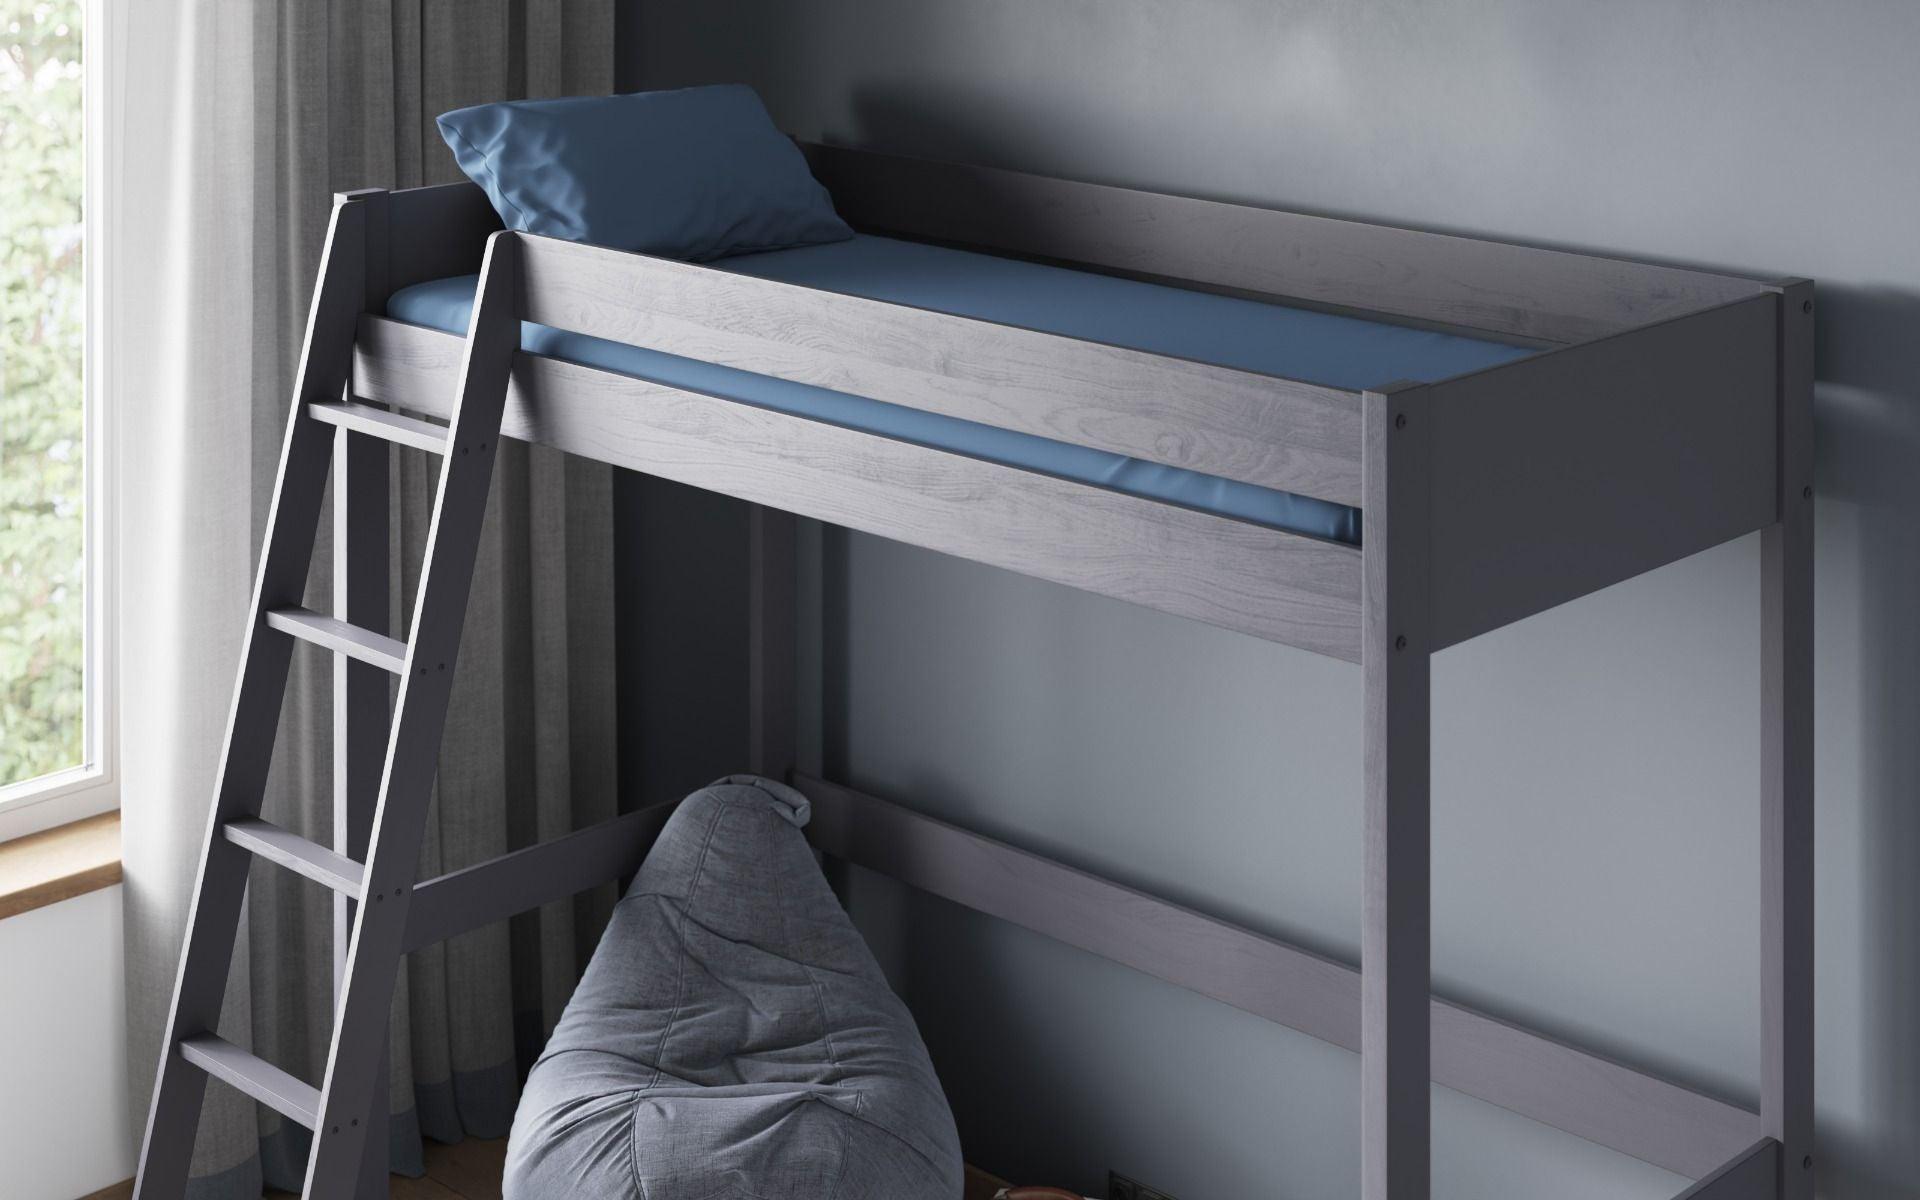 Noomi Small Double High Sleeper Bunk Bed Frame in Grey